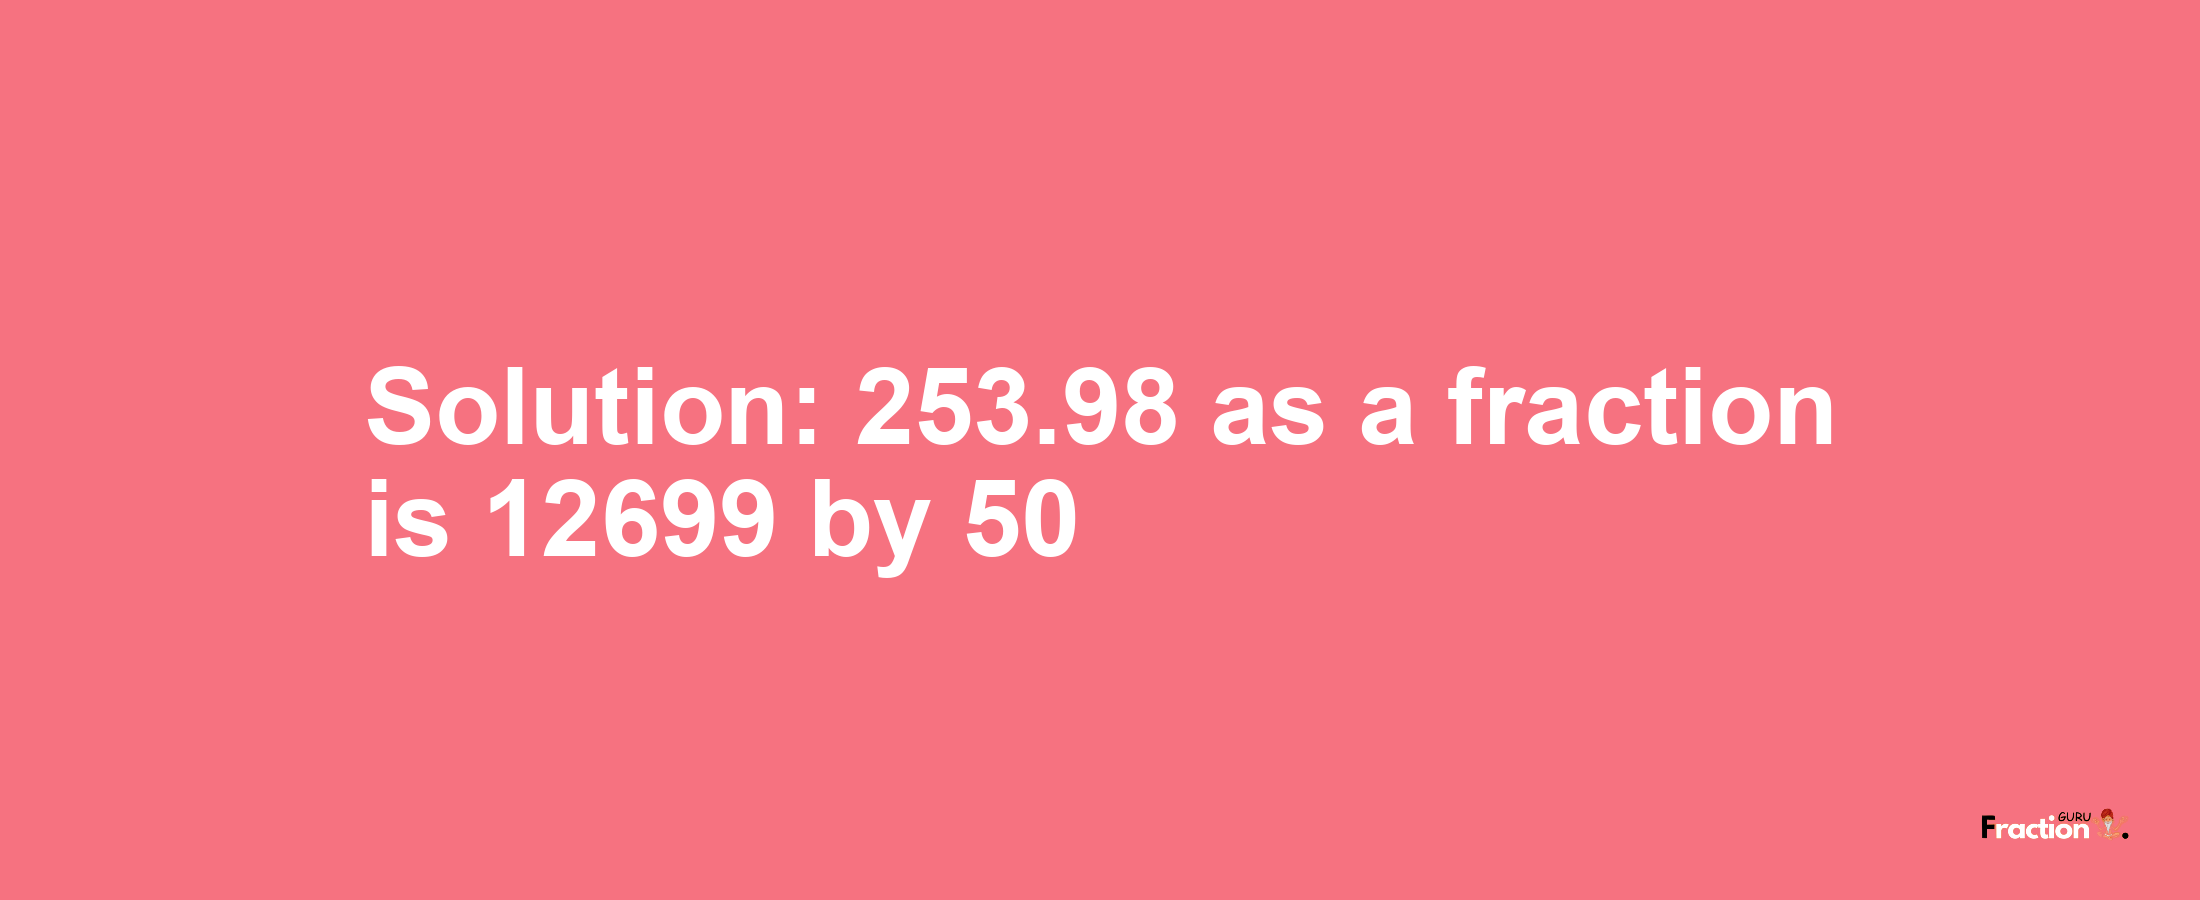 Solution:253.98 as a fraction is 12699/50